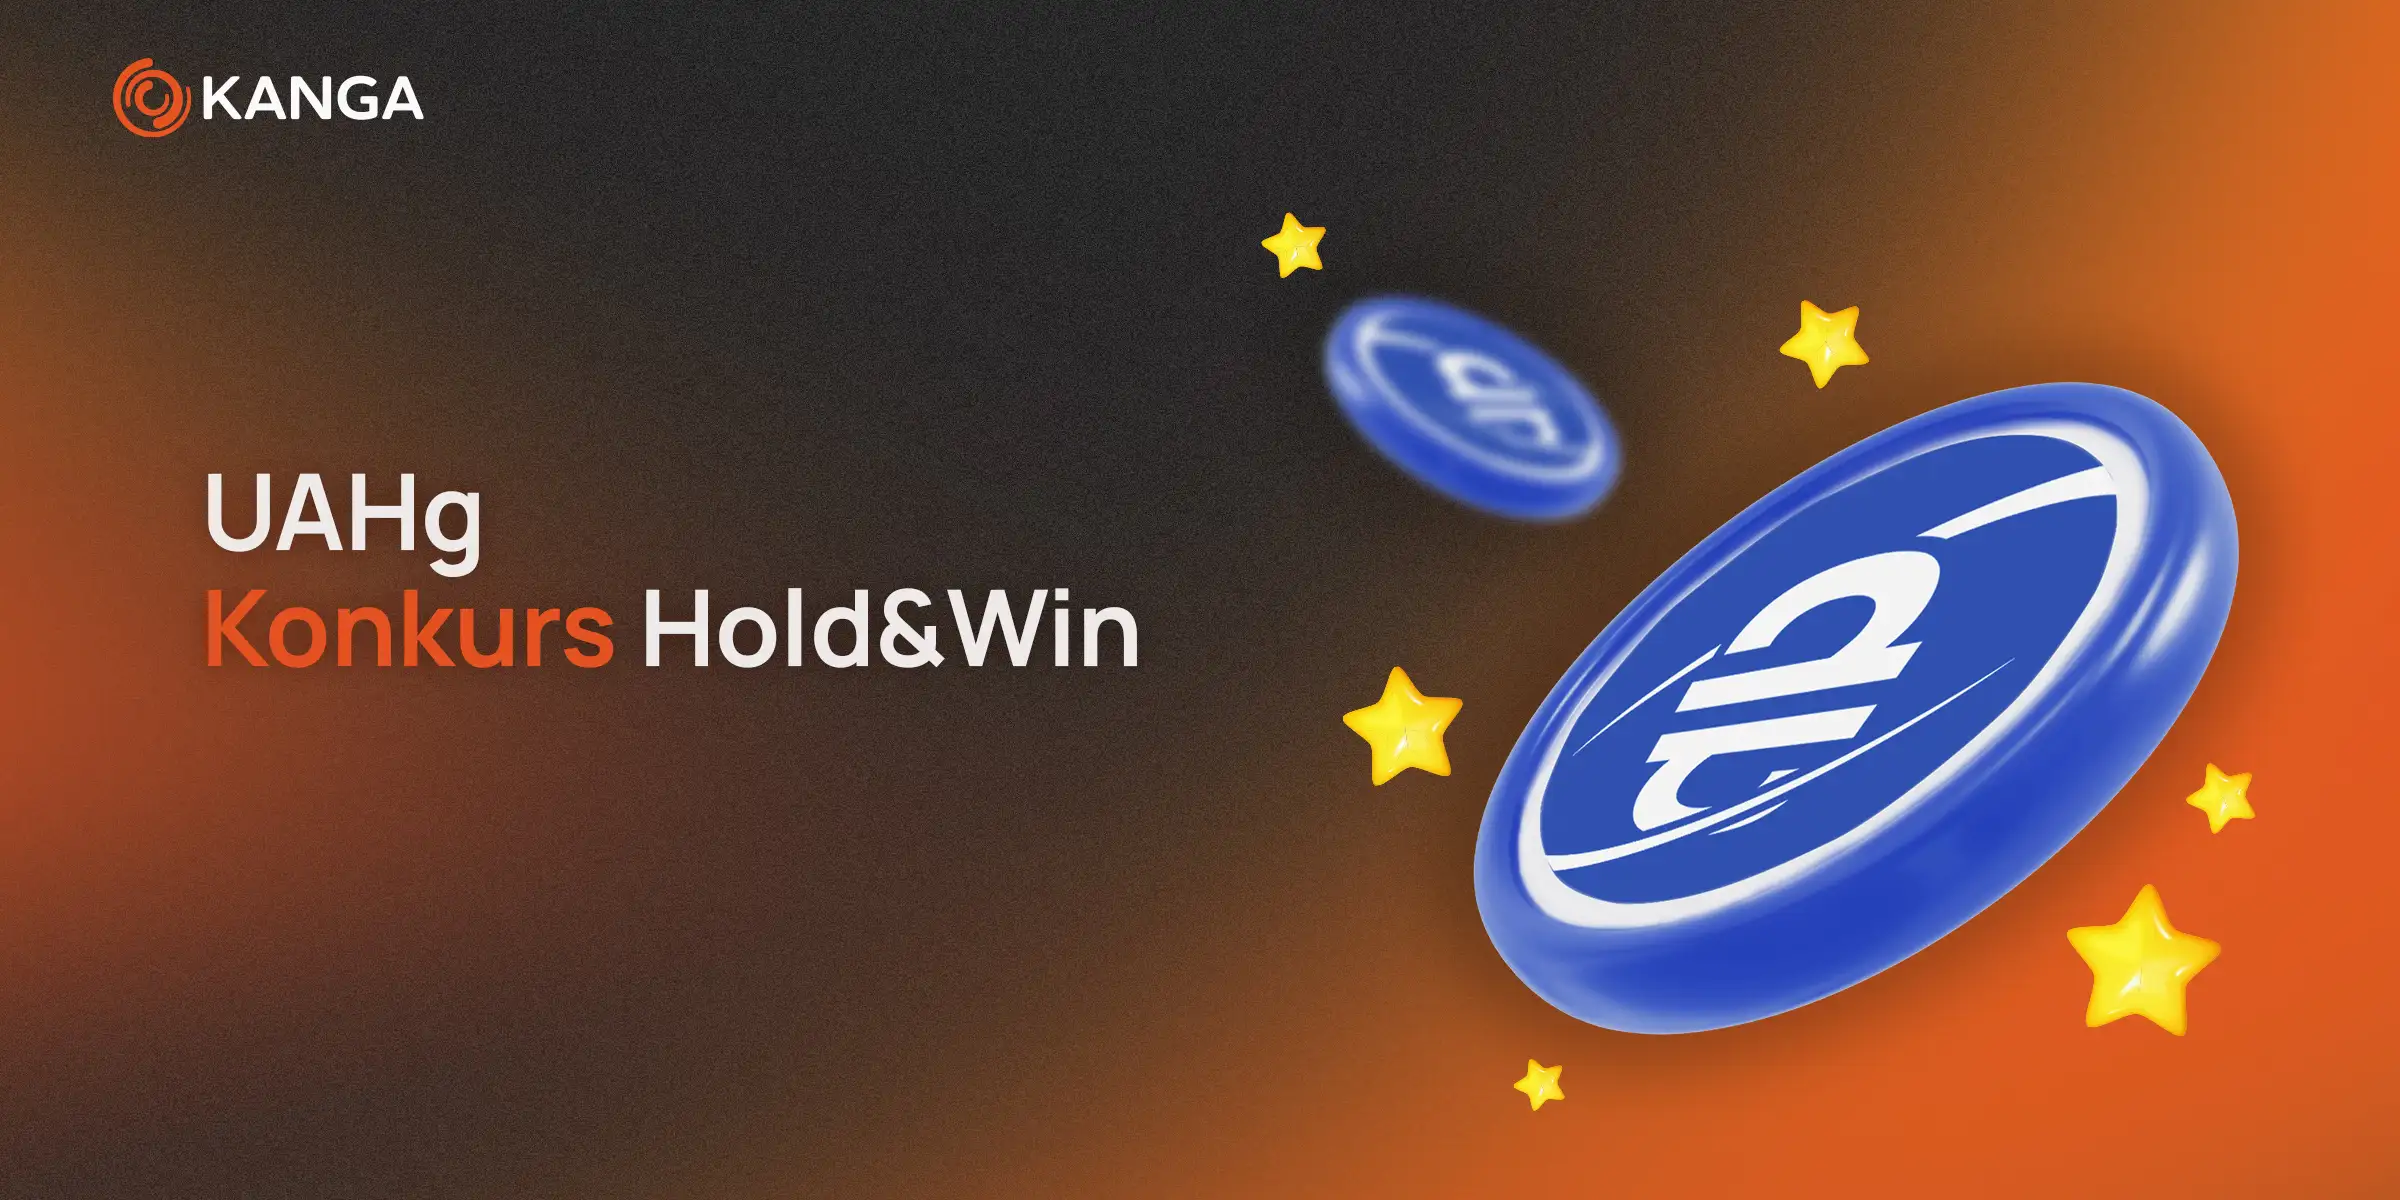 Konkurs "Hold and Win"